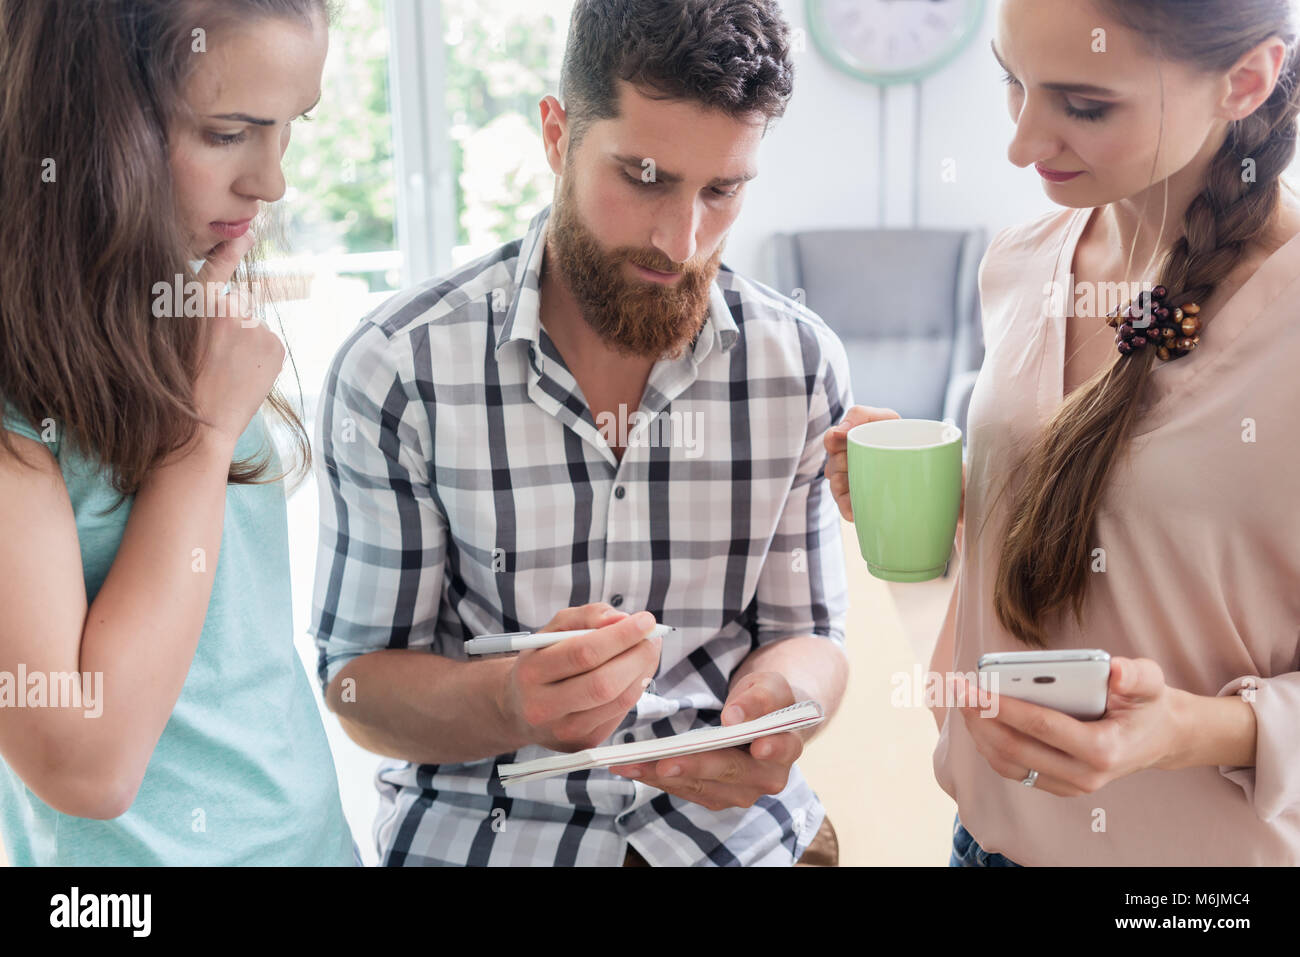 Three co-workers during a brainstorming session Stock Photo